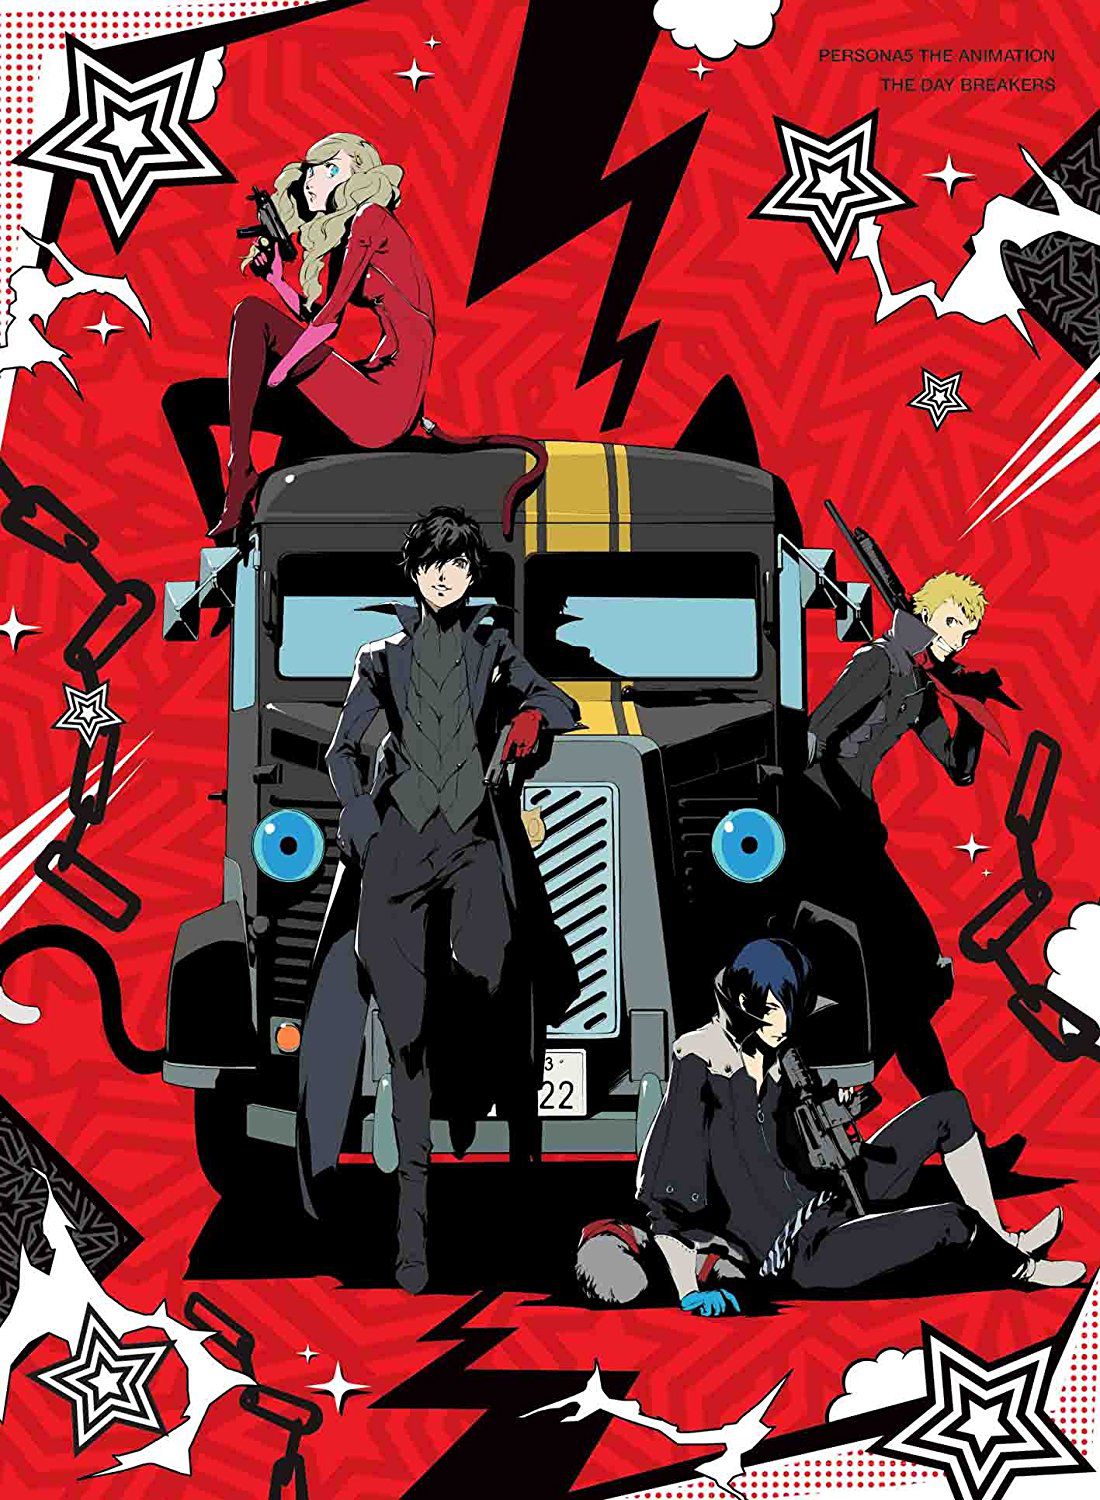 Persona 5 the Animation: The Day Breakers - Anime (OAV) (2016) streaming VF gratuit complet